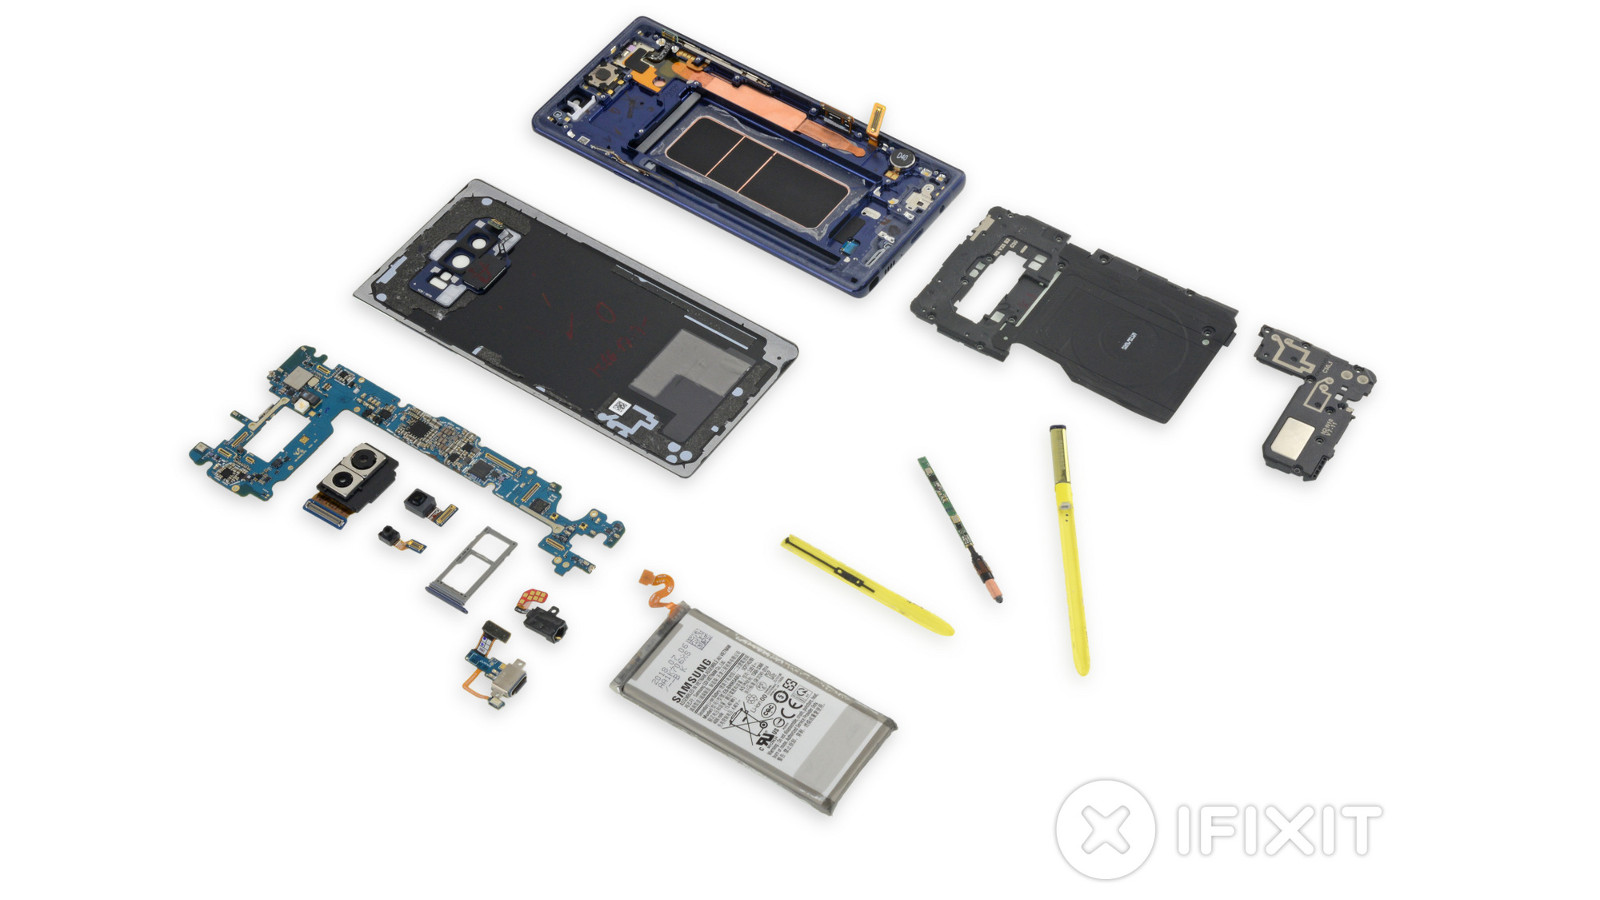 The Samsung Galaxy Note 9 teardown by iFixit.